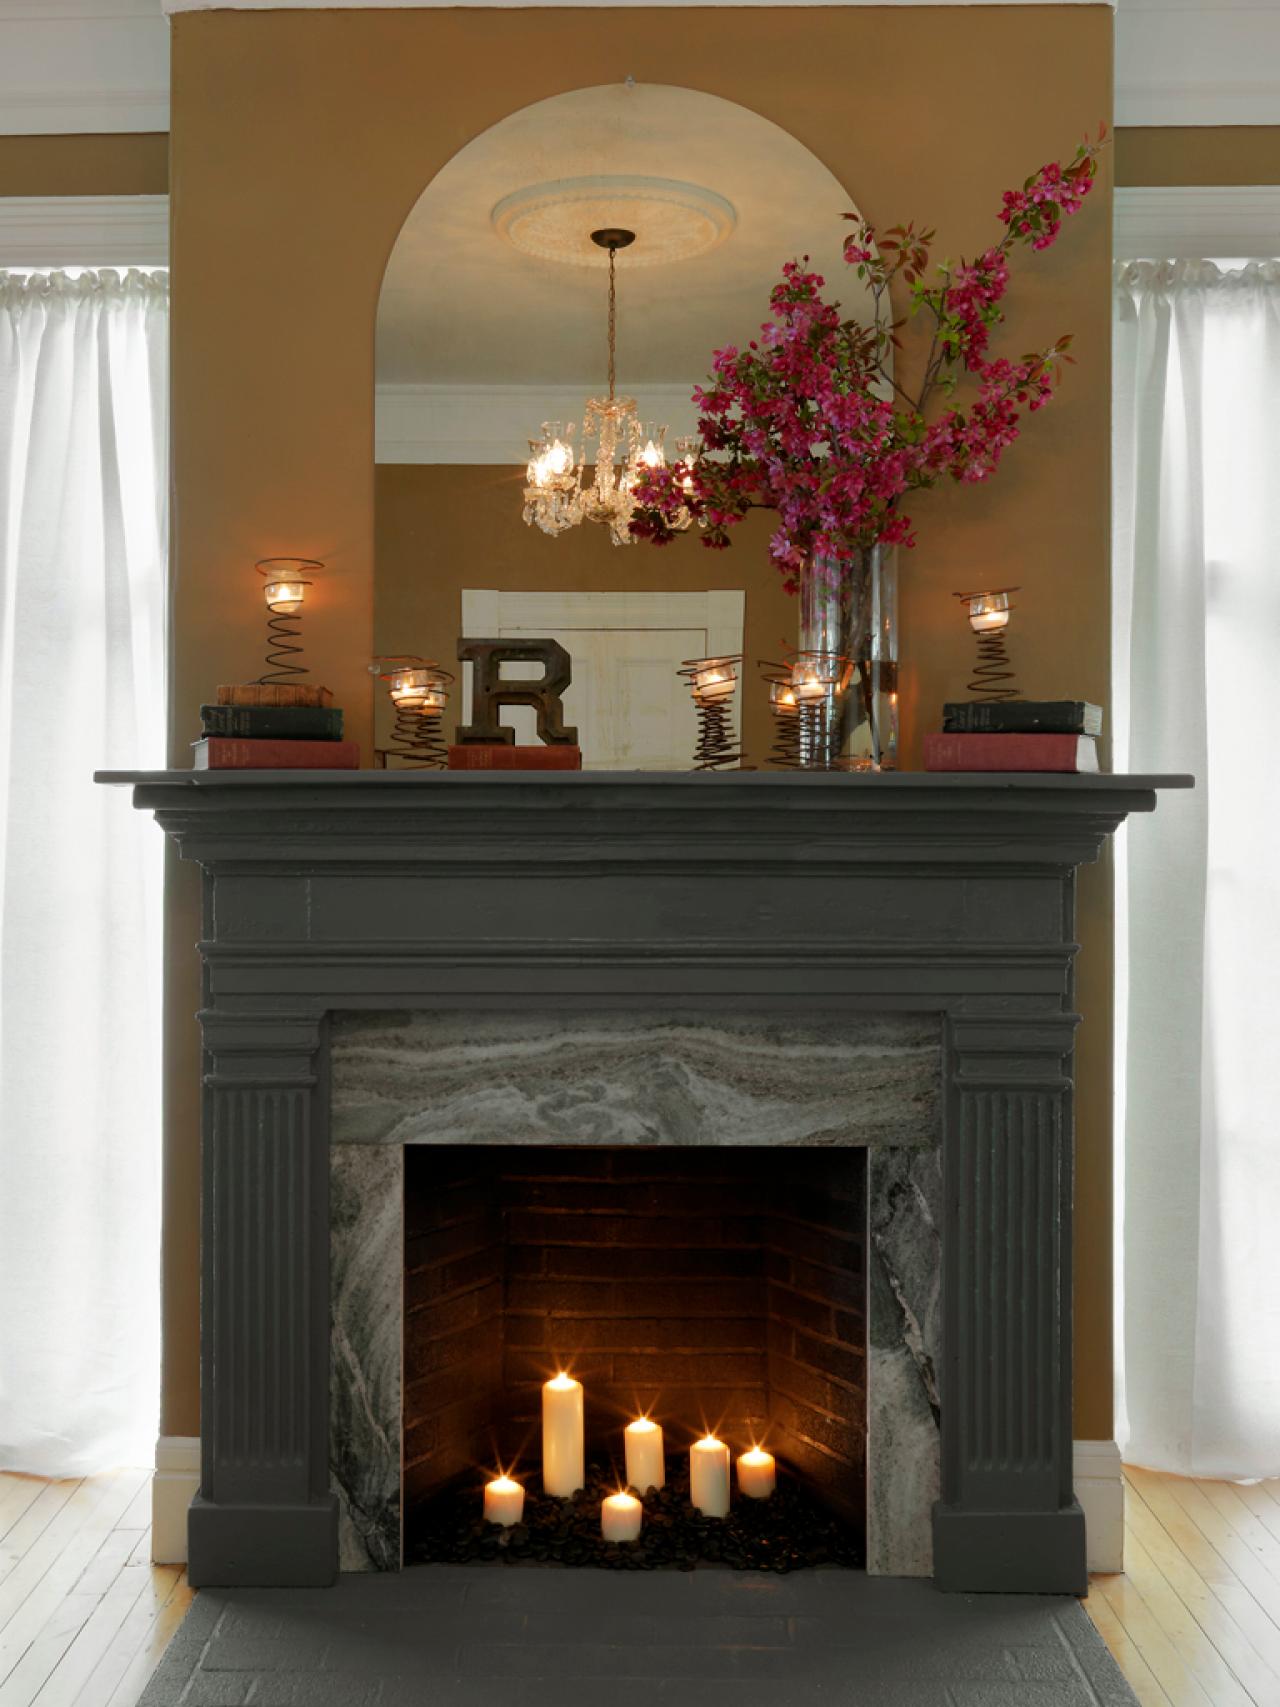 Fireplace Surround And Make A Mantel, Fire Place Surrounds